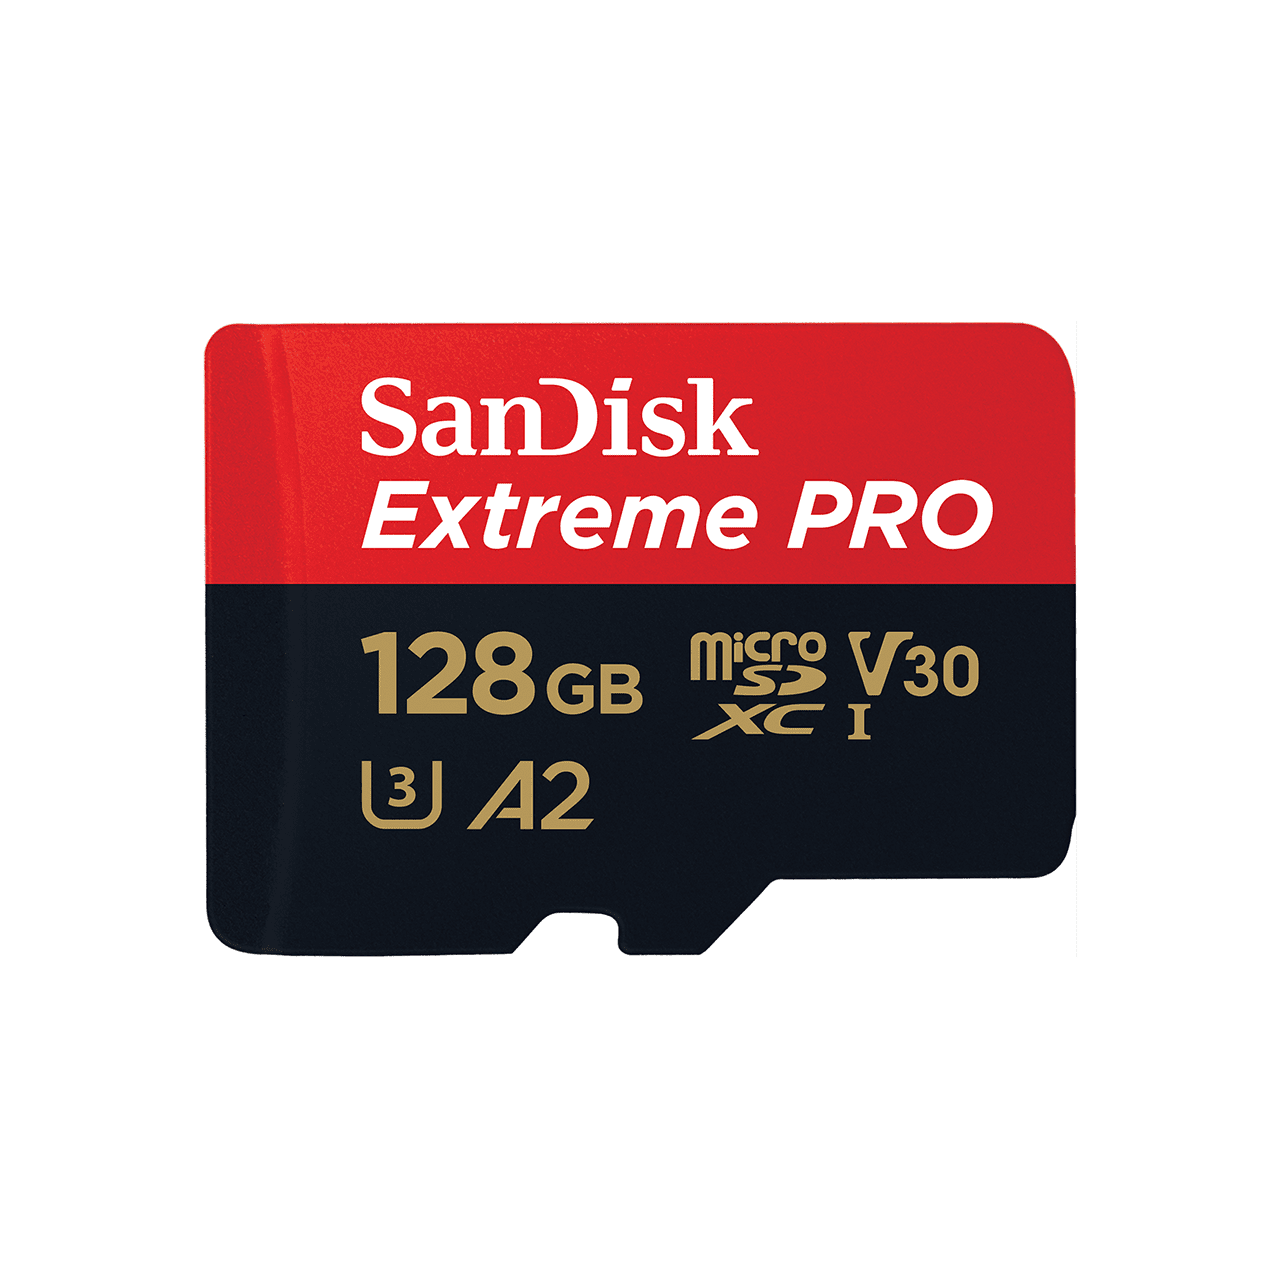 SanDisk Extreme Pro microSDXC UHS-1 Card with Adapter 128GB